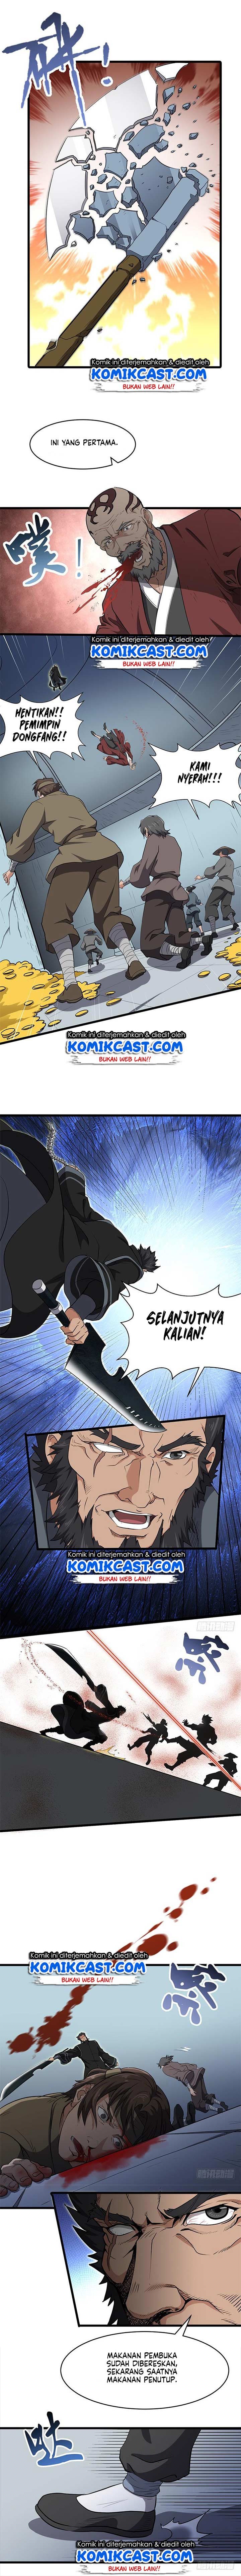 Chaotic Sword God Chapter 147